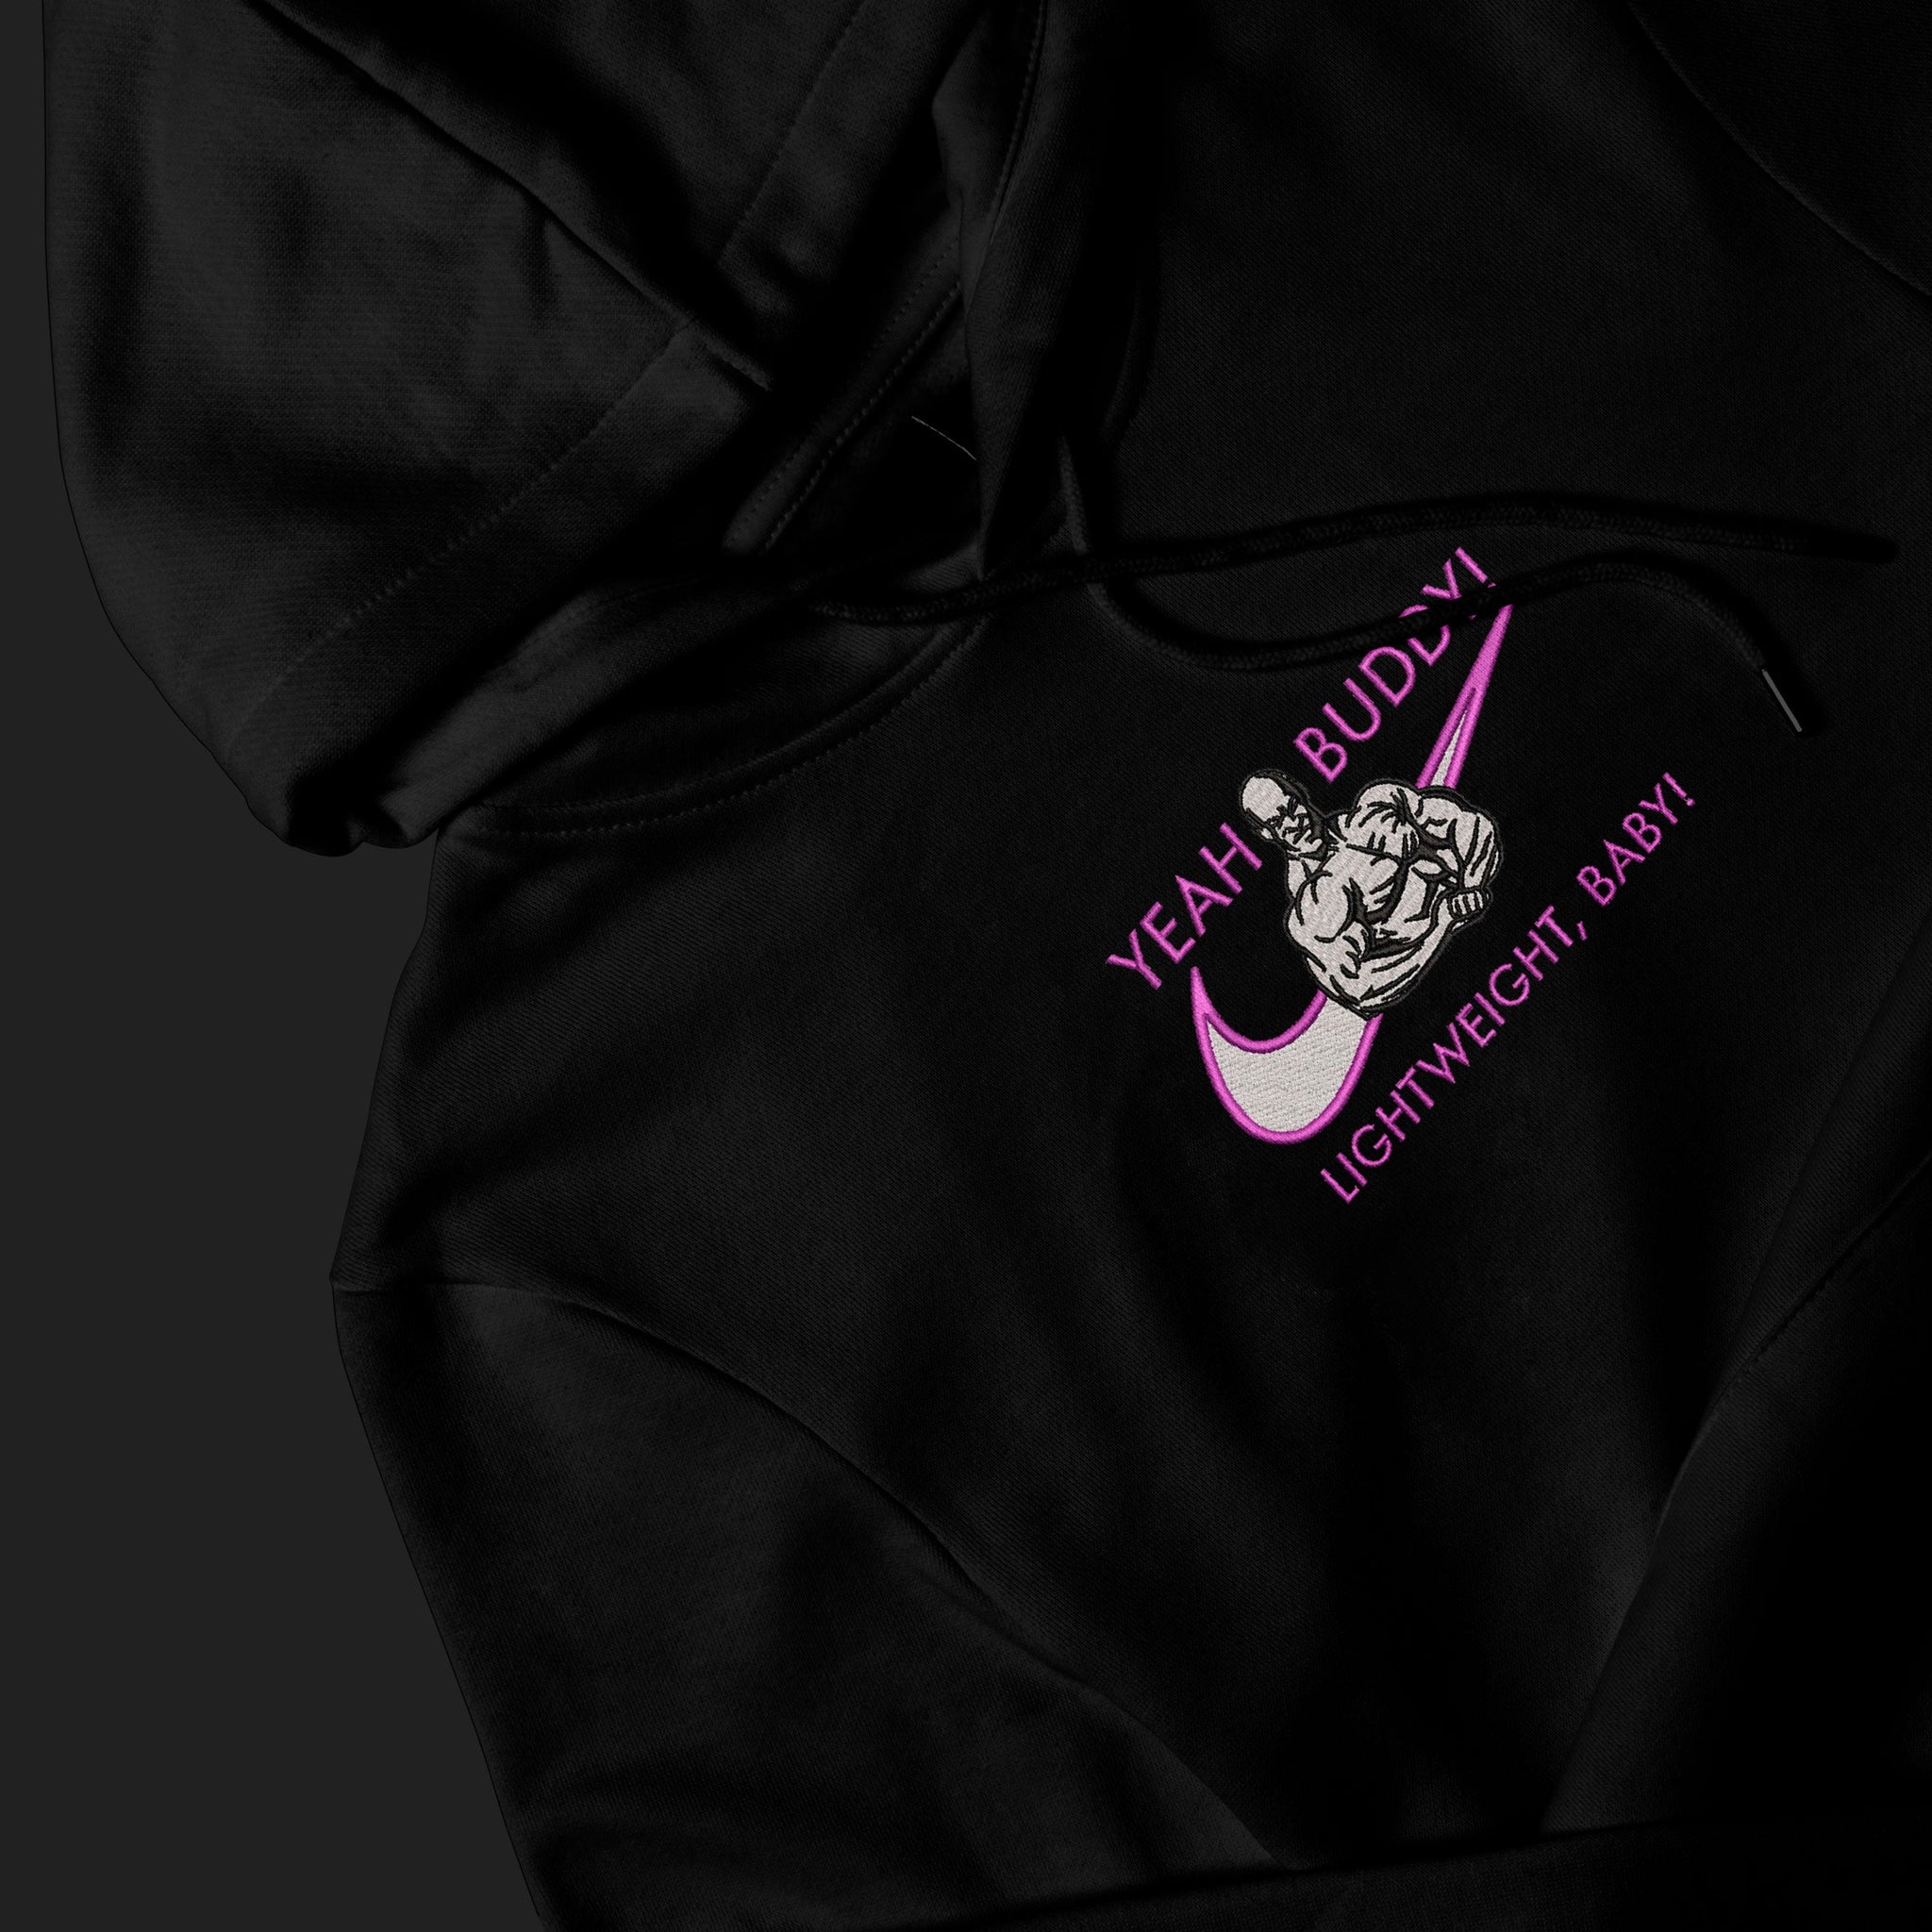 LIMITED YEAH BUDDY! LIGHT WEIGHT BABY RONNIE COLEMAN EMBROIDERED HOODIE